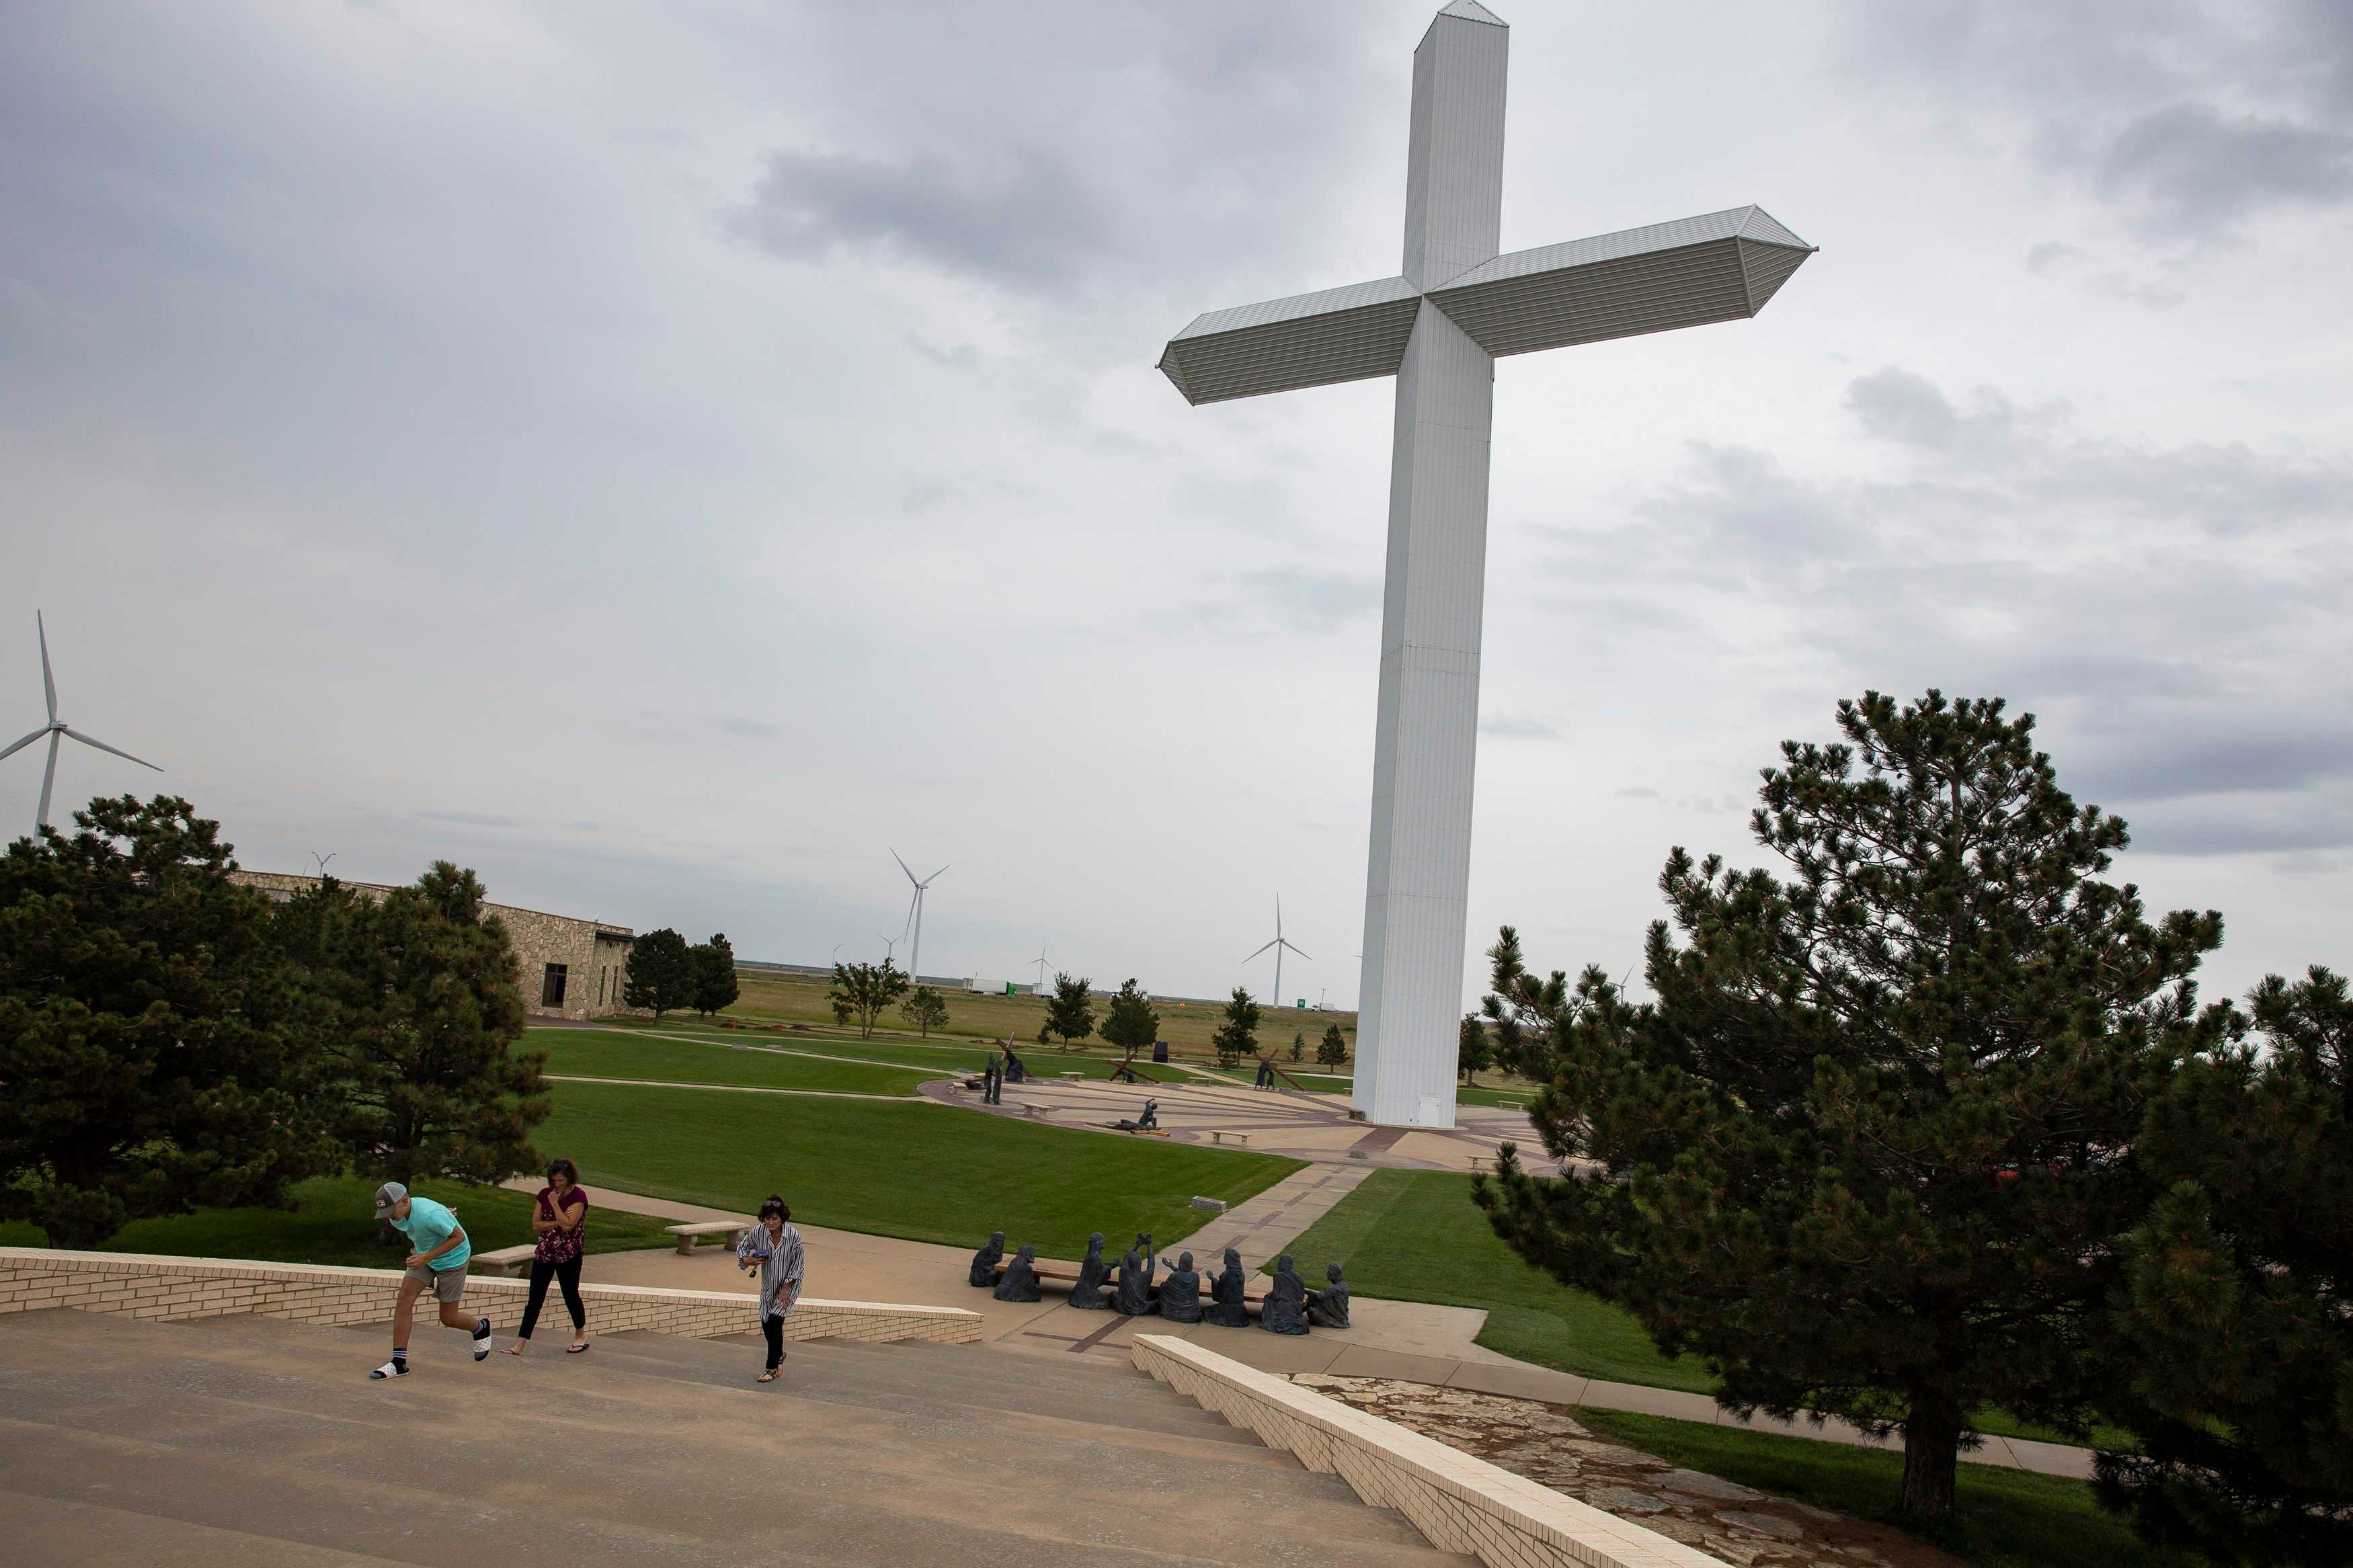 This giant cross located off Route 66 in Groom, Texas, measures 190 feet tall. It attracts a mix of believers, locals, and tourists who happen upon it.